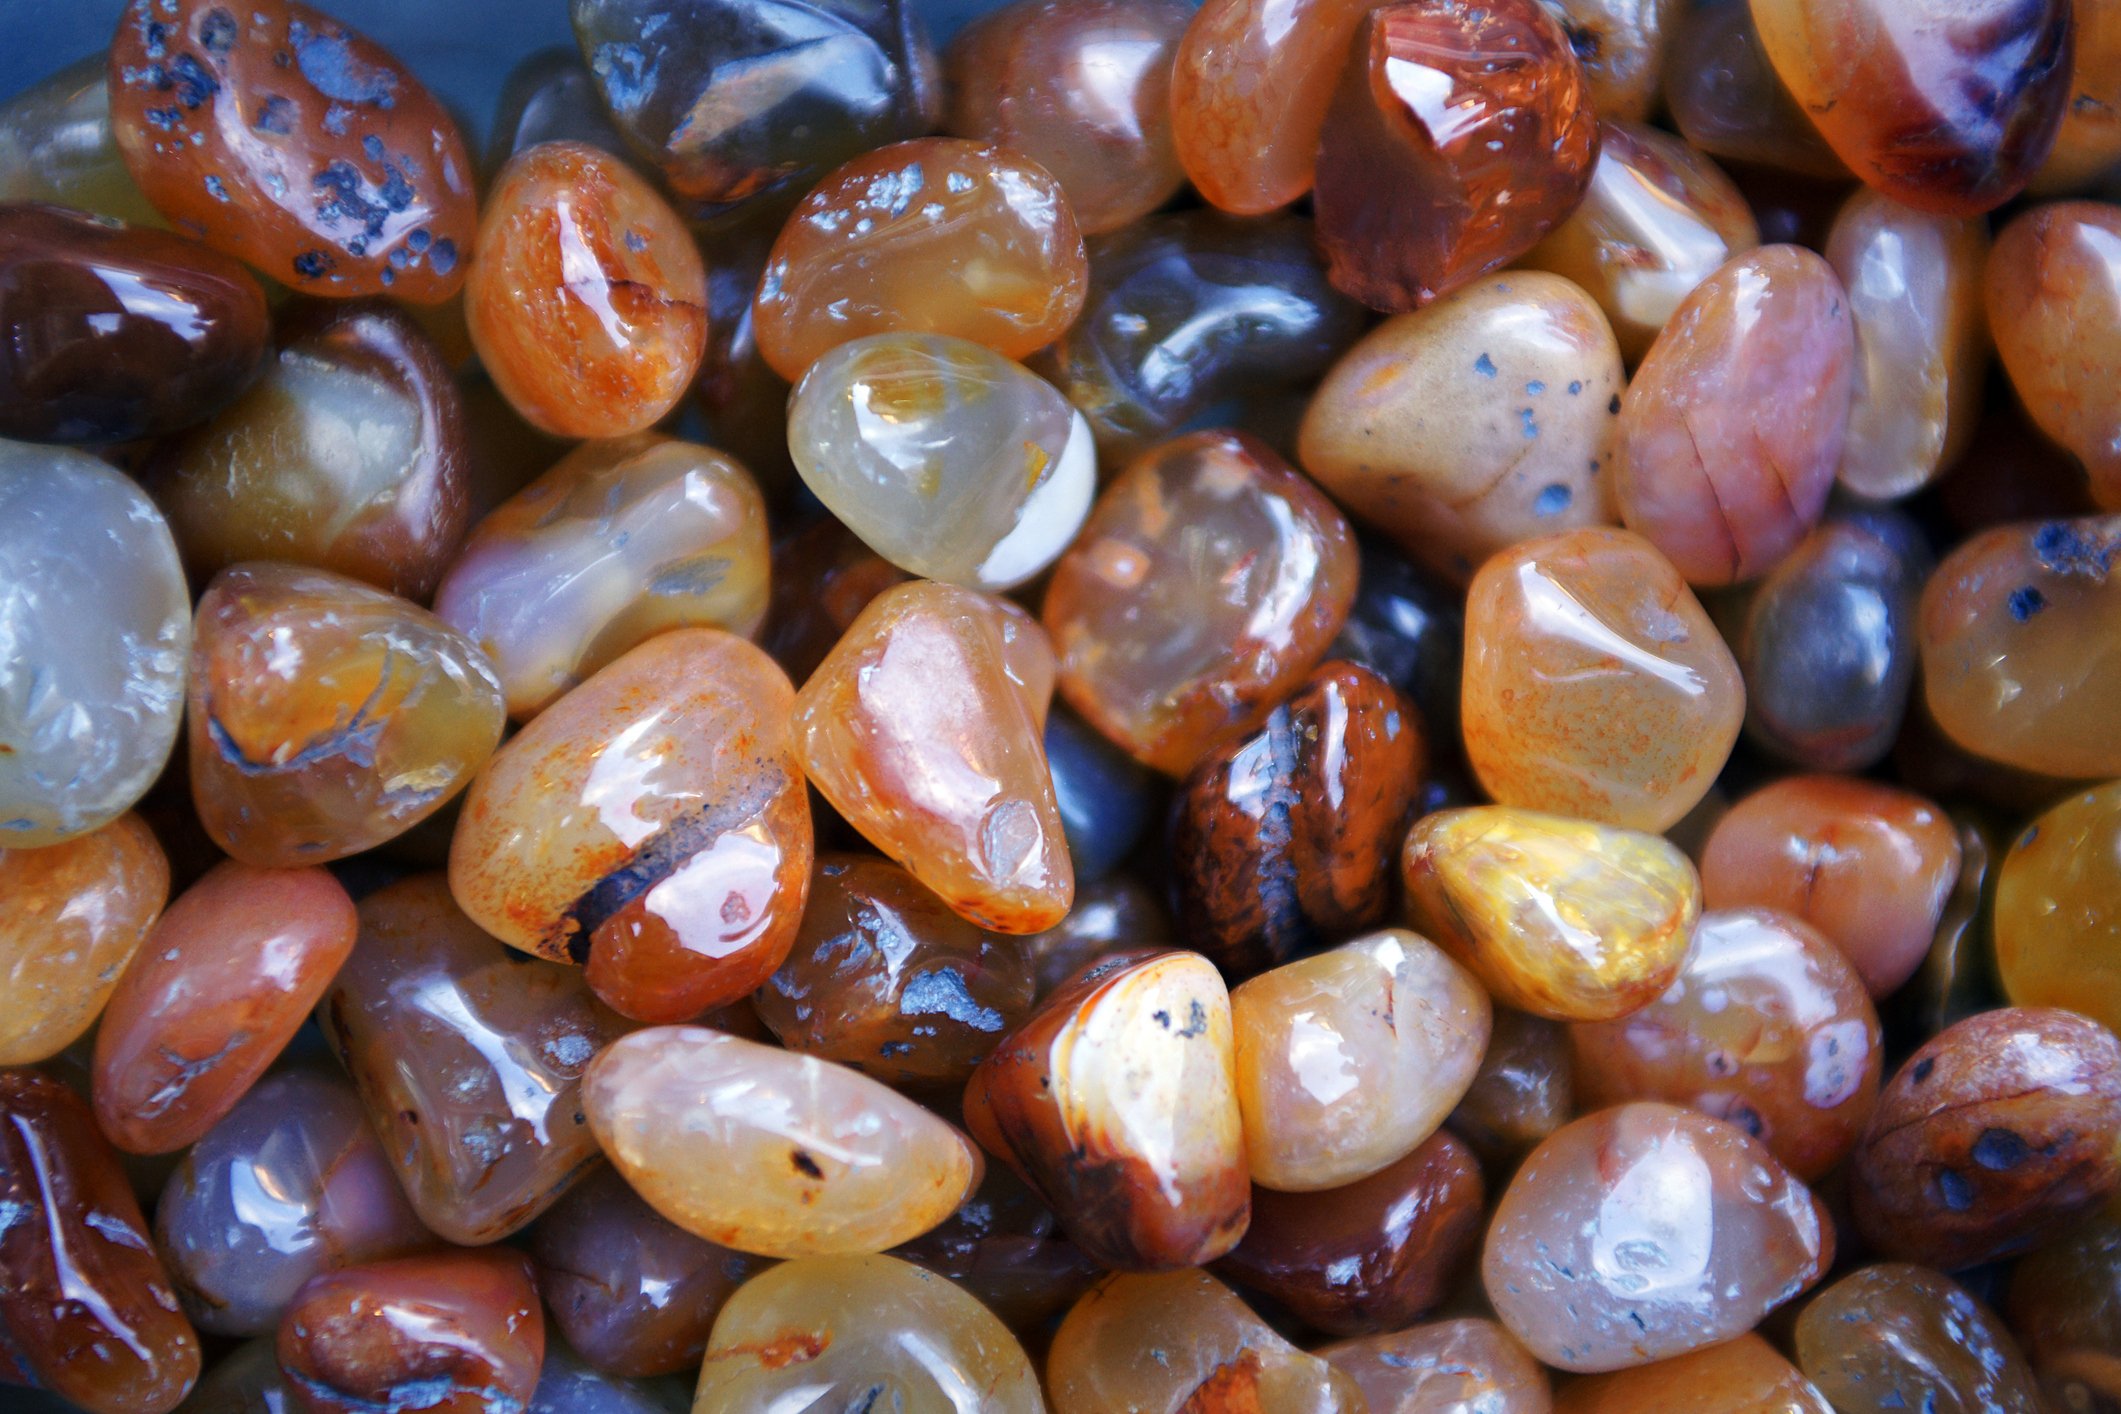 Agates, a type of translucent chalcedony, come in a wide variety of colors. (iStock Photo)